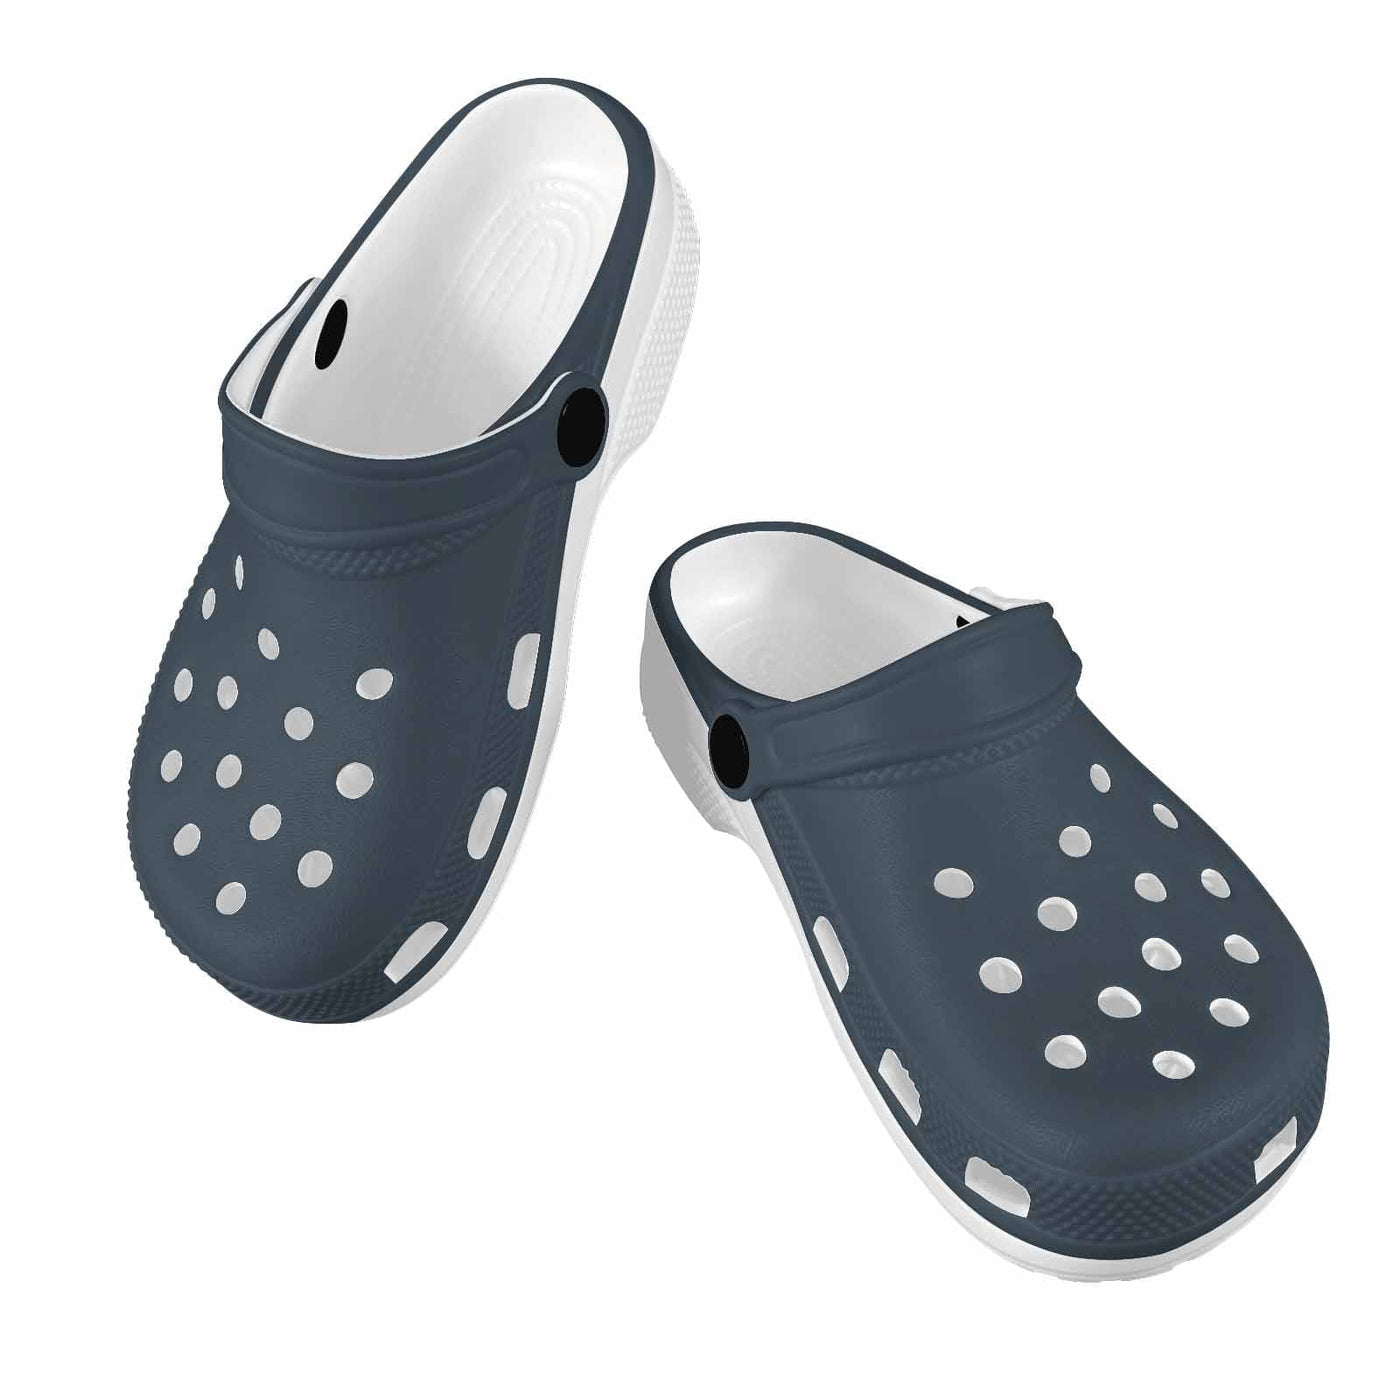 Charcoal Black Clogs For Youth - Unisex | Clogs | Youth